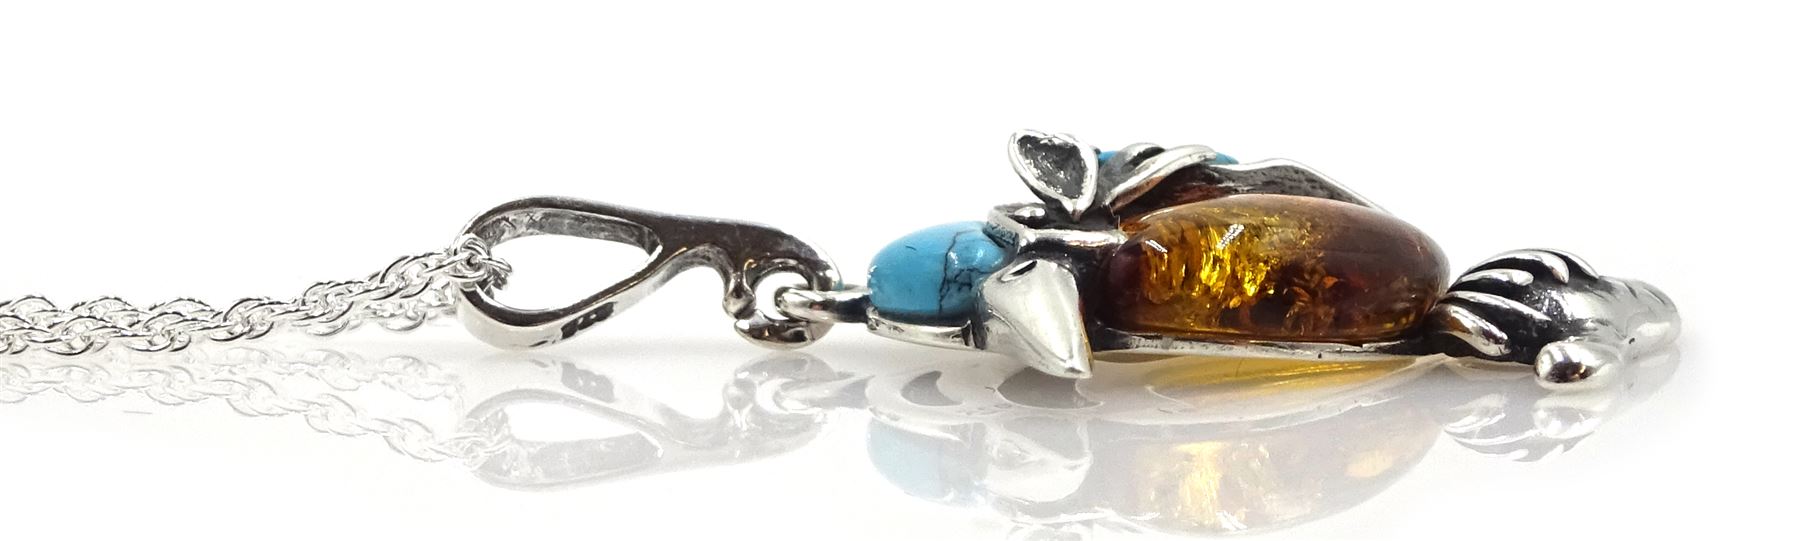 Silver Baltic amber and turquoise Kingfisher pendant necklace - Image 2 of 2